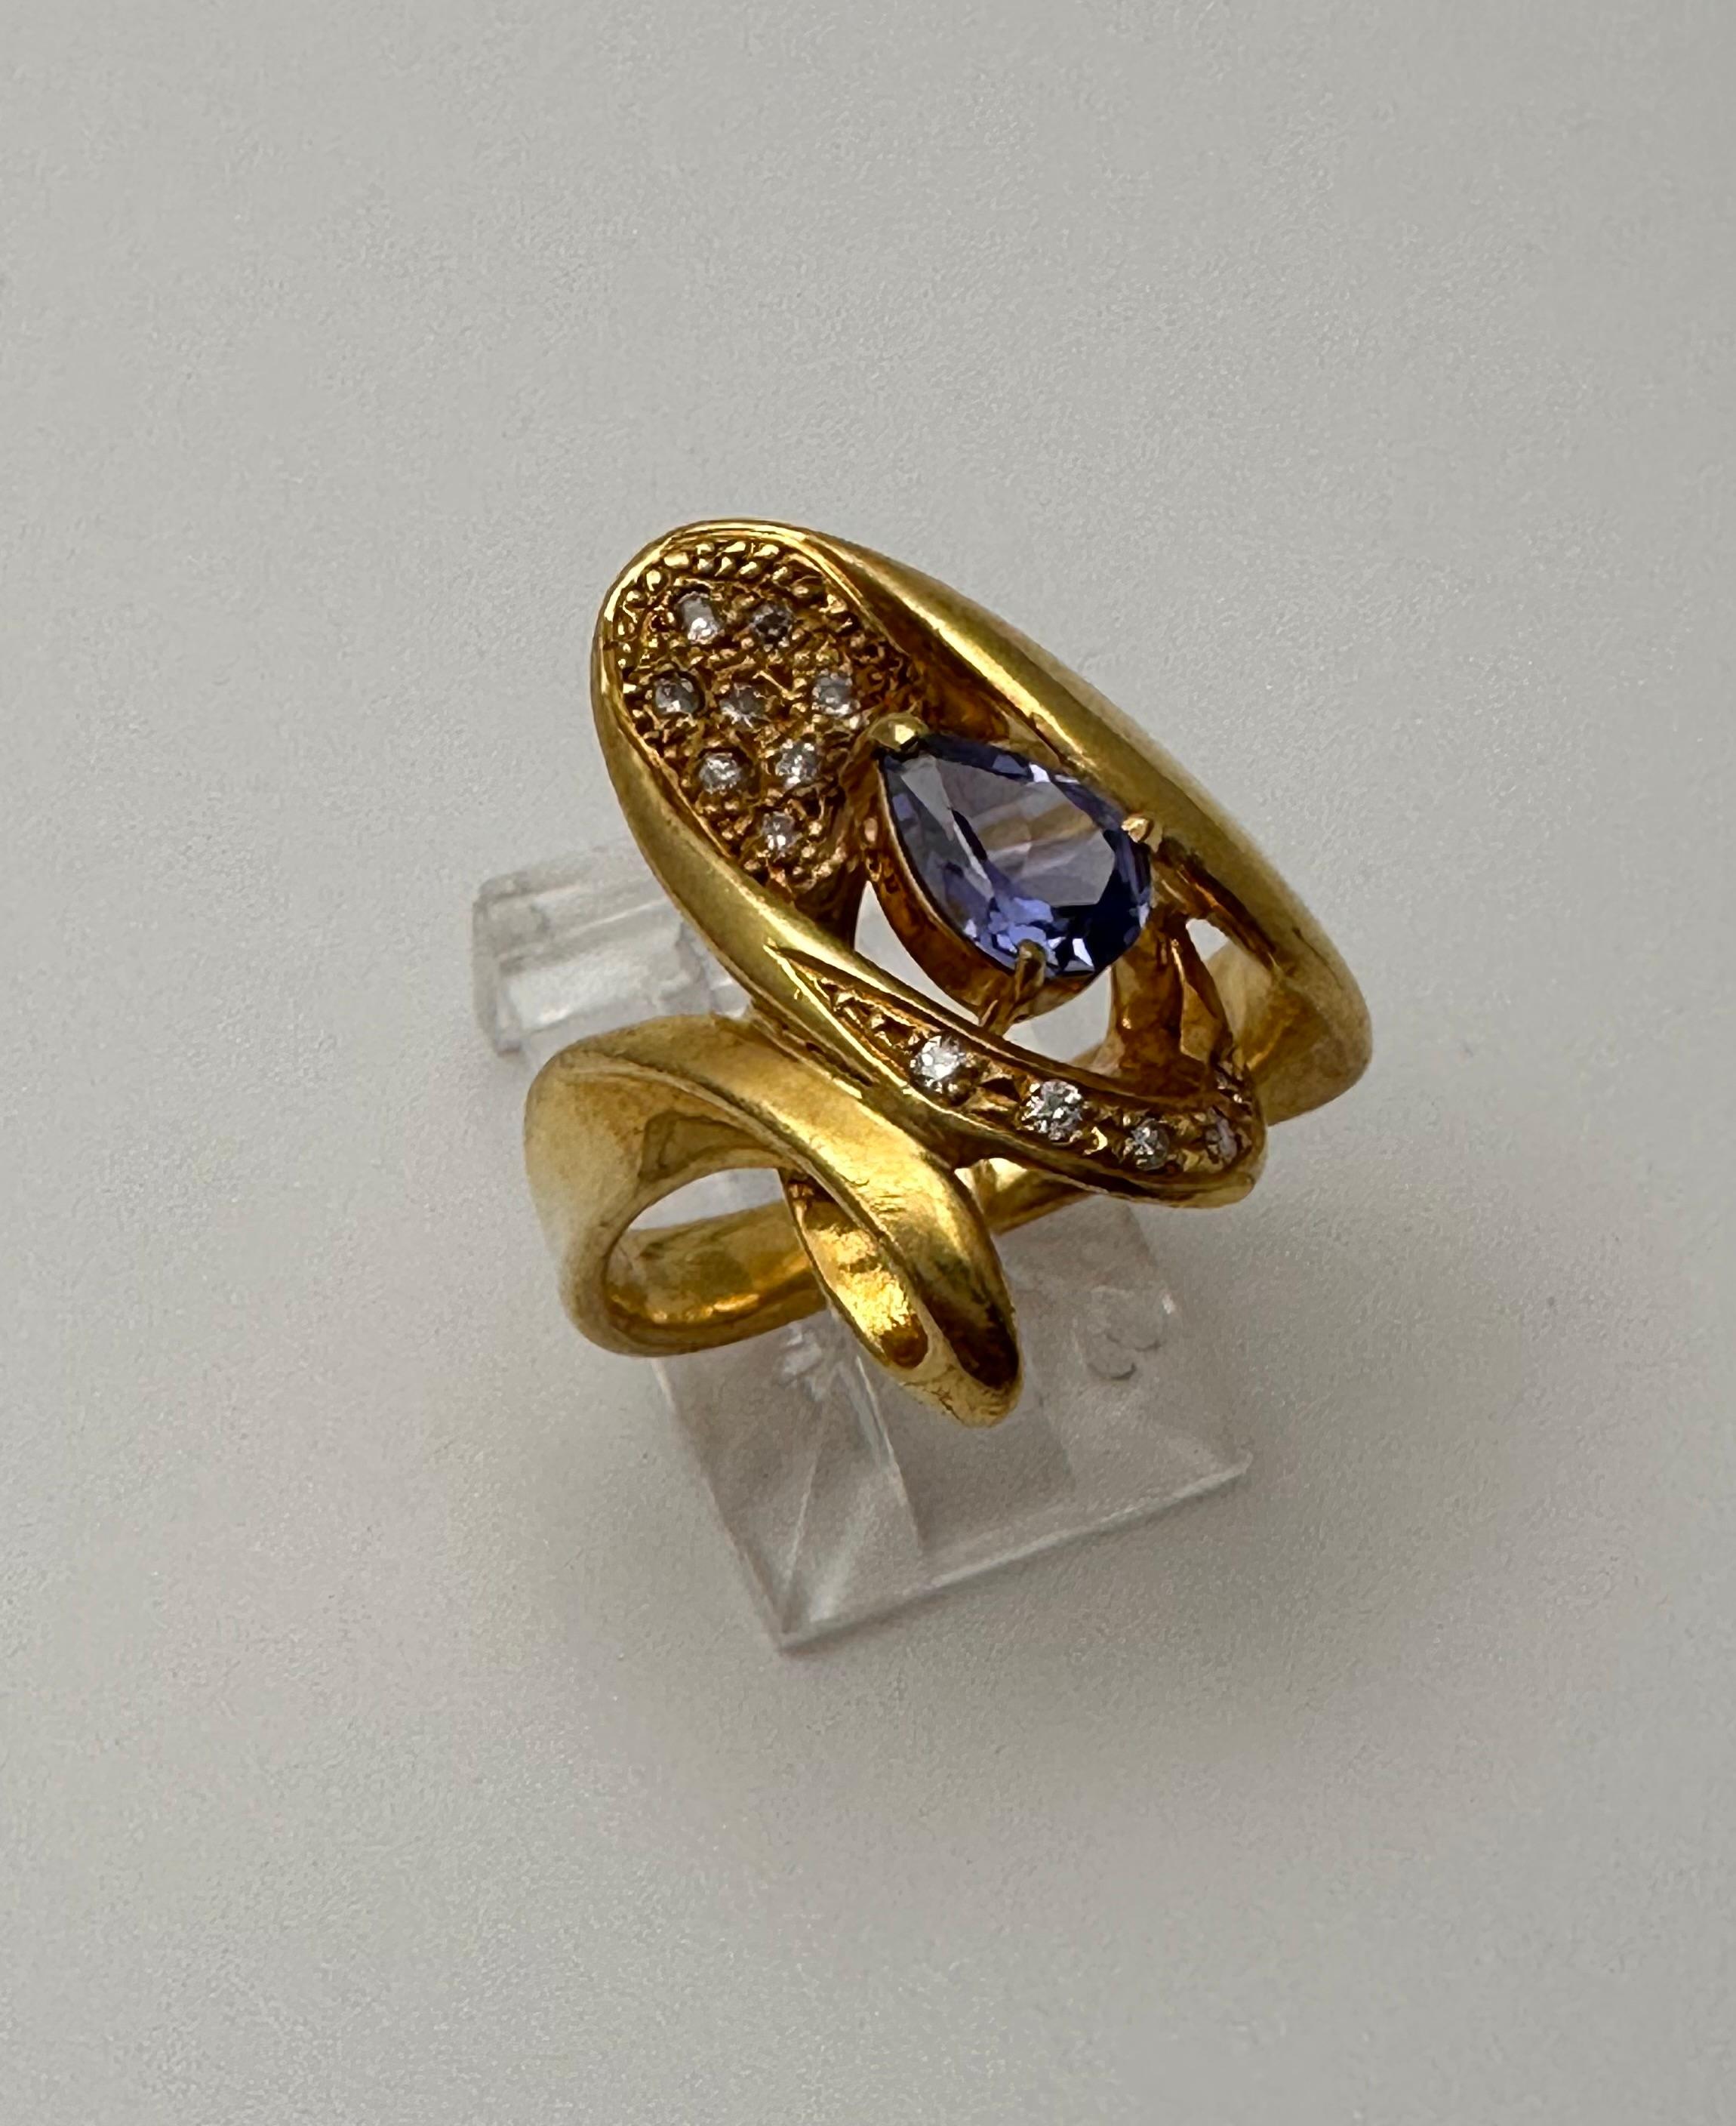 18k Yellow Gold approx.  5.5mm x 7mm Pear Tanzanite with 13 Round Diamonds 
Ring Size 7

Tanzanite 

Tanzanite changes colors when it is viewed from different directions. This shifting of colors has been said to facilitate raising consciousness. It